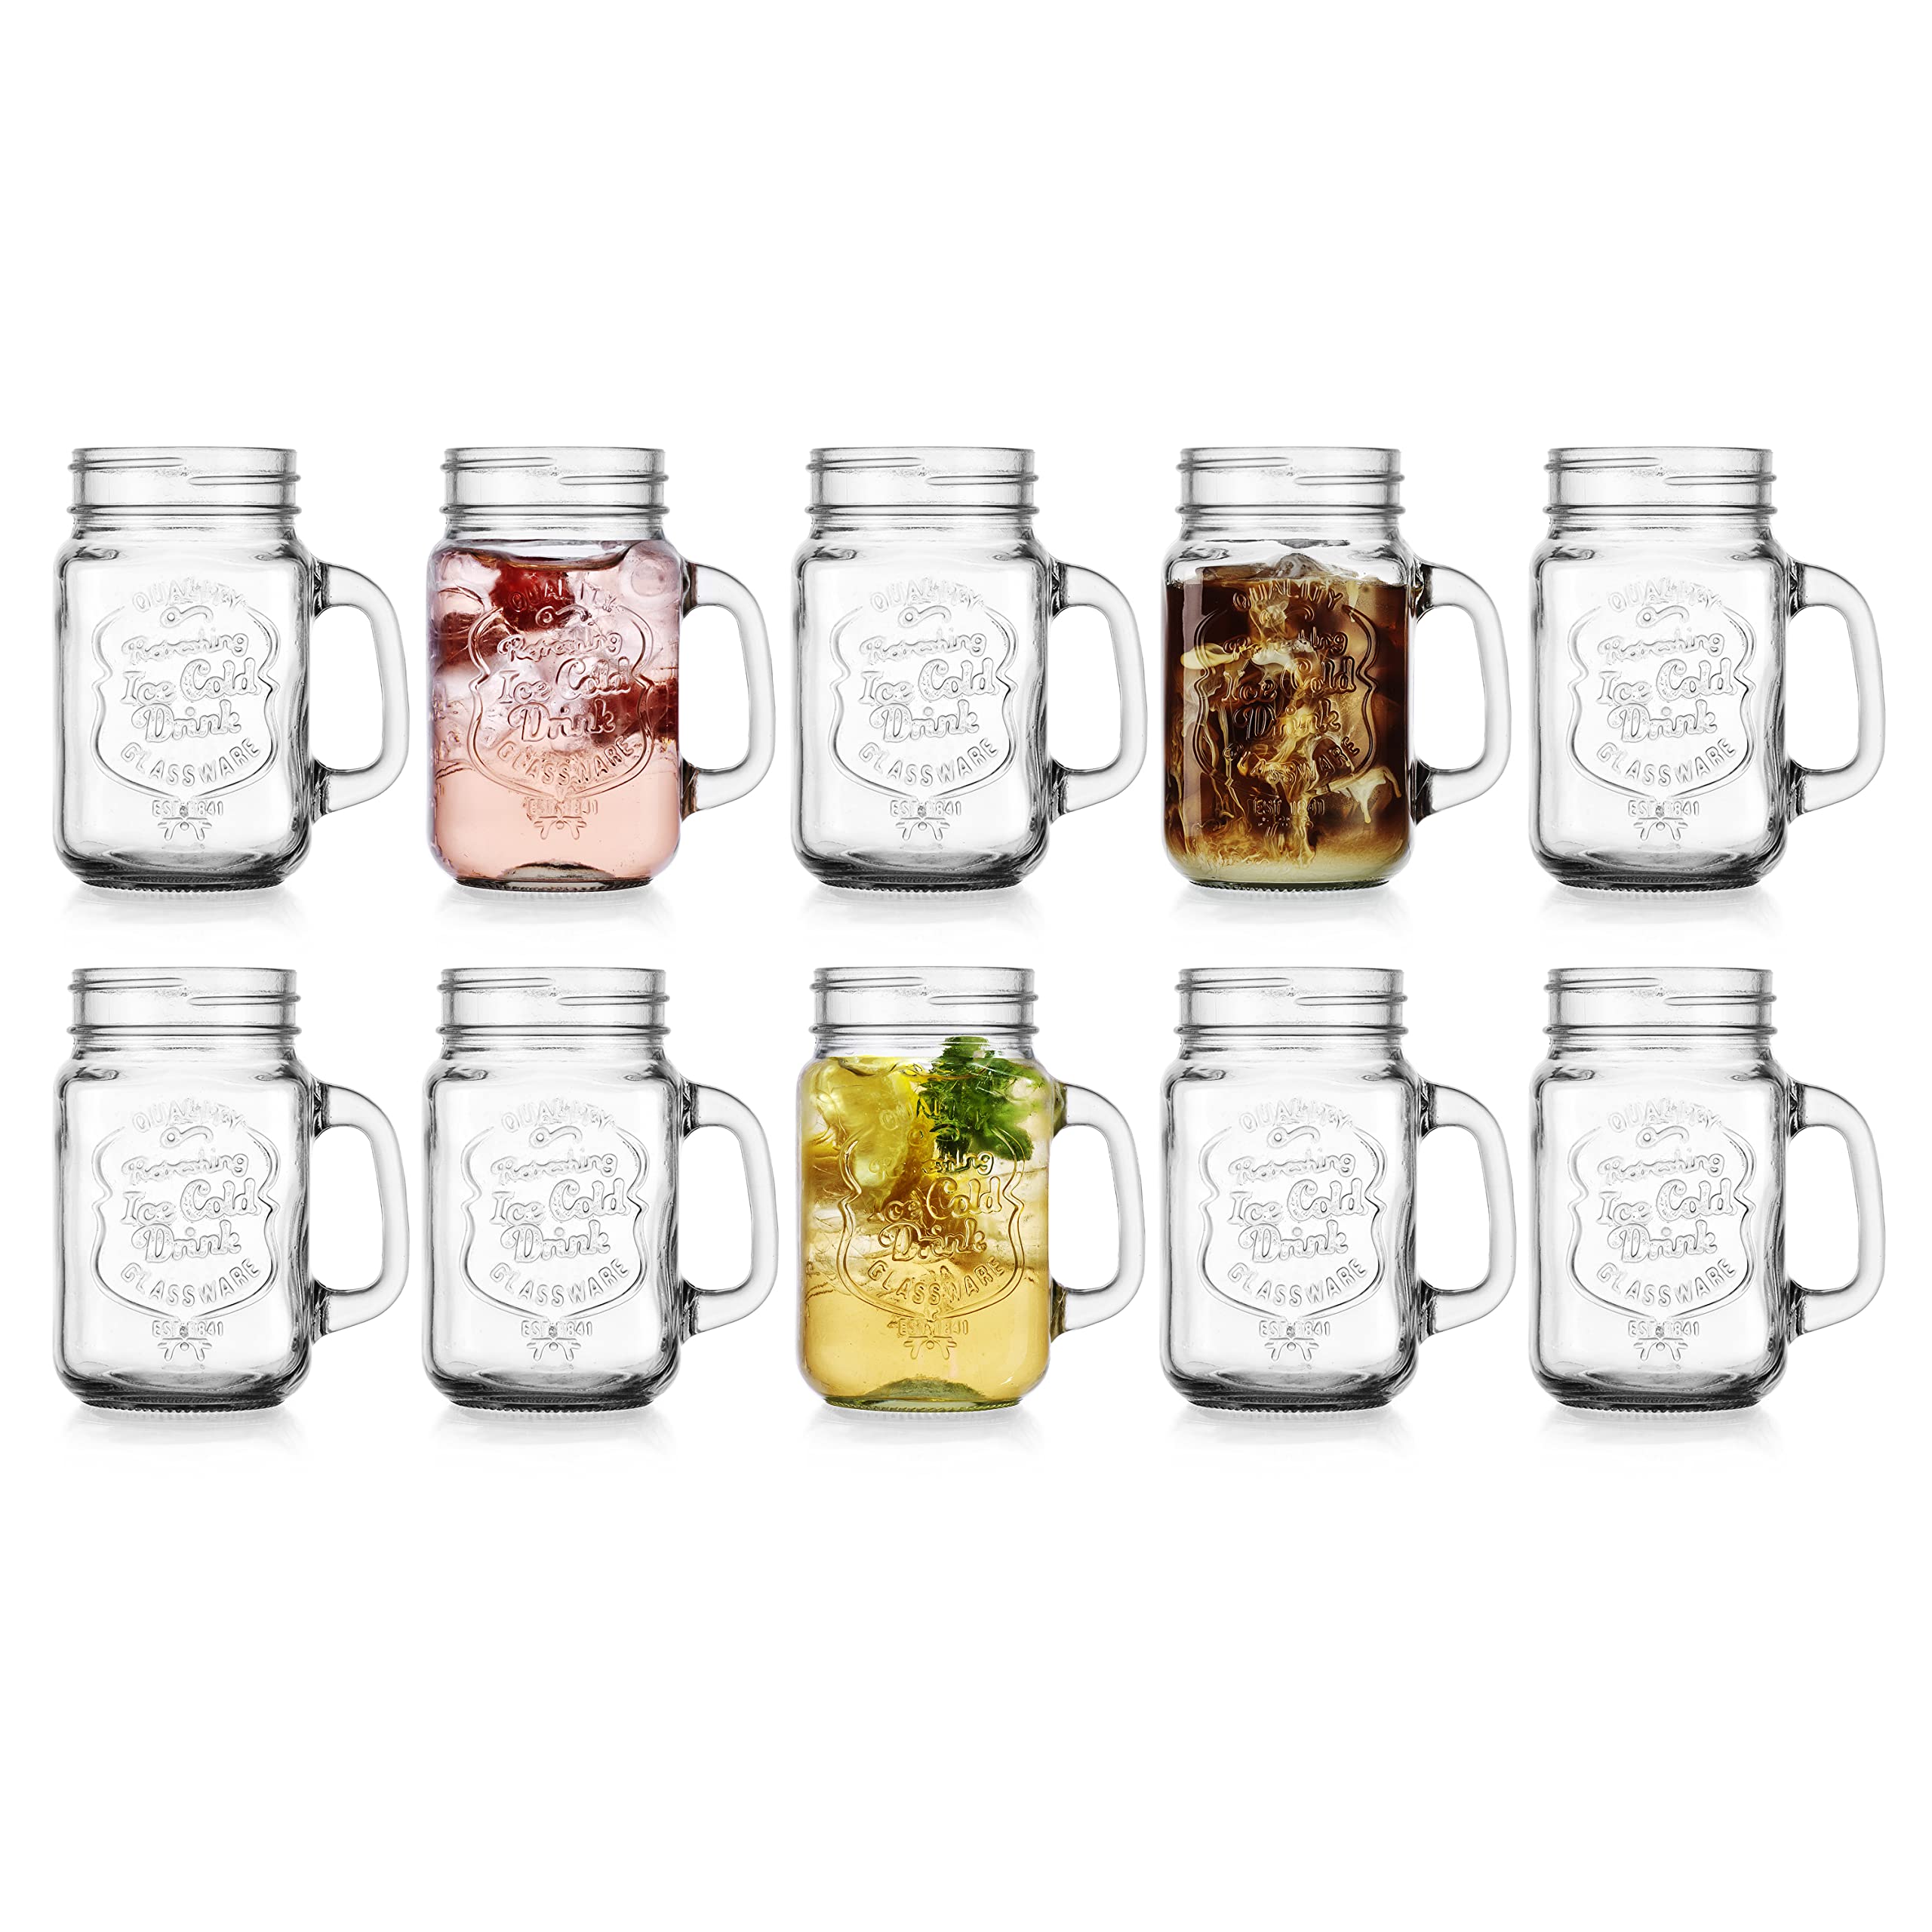 Glaver's Set of 10 Ice Cold 16 Oz. Mason Drinking Glasses With Handles. Quality Refreshing Ice Cold Embossed Logo Jars for Beverages, Cocktails, Shakes, Smoothies, Sodas, Juice.  - Good